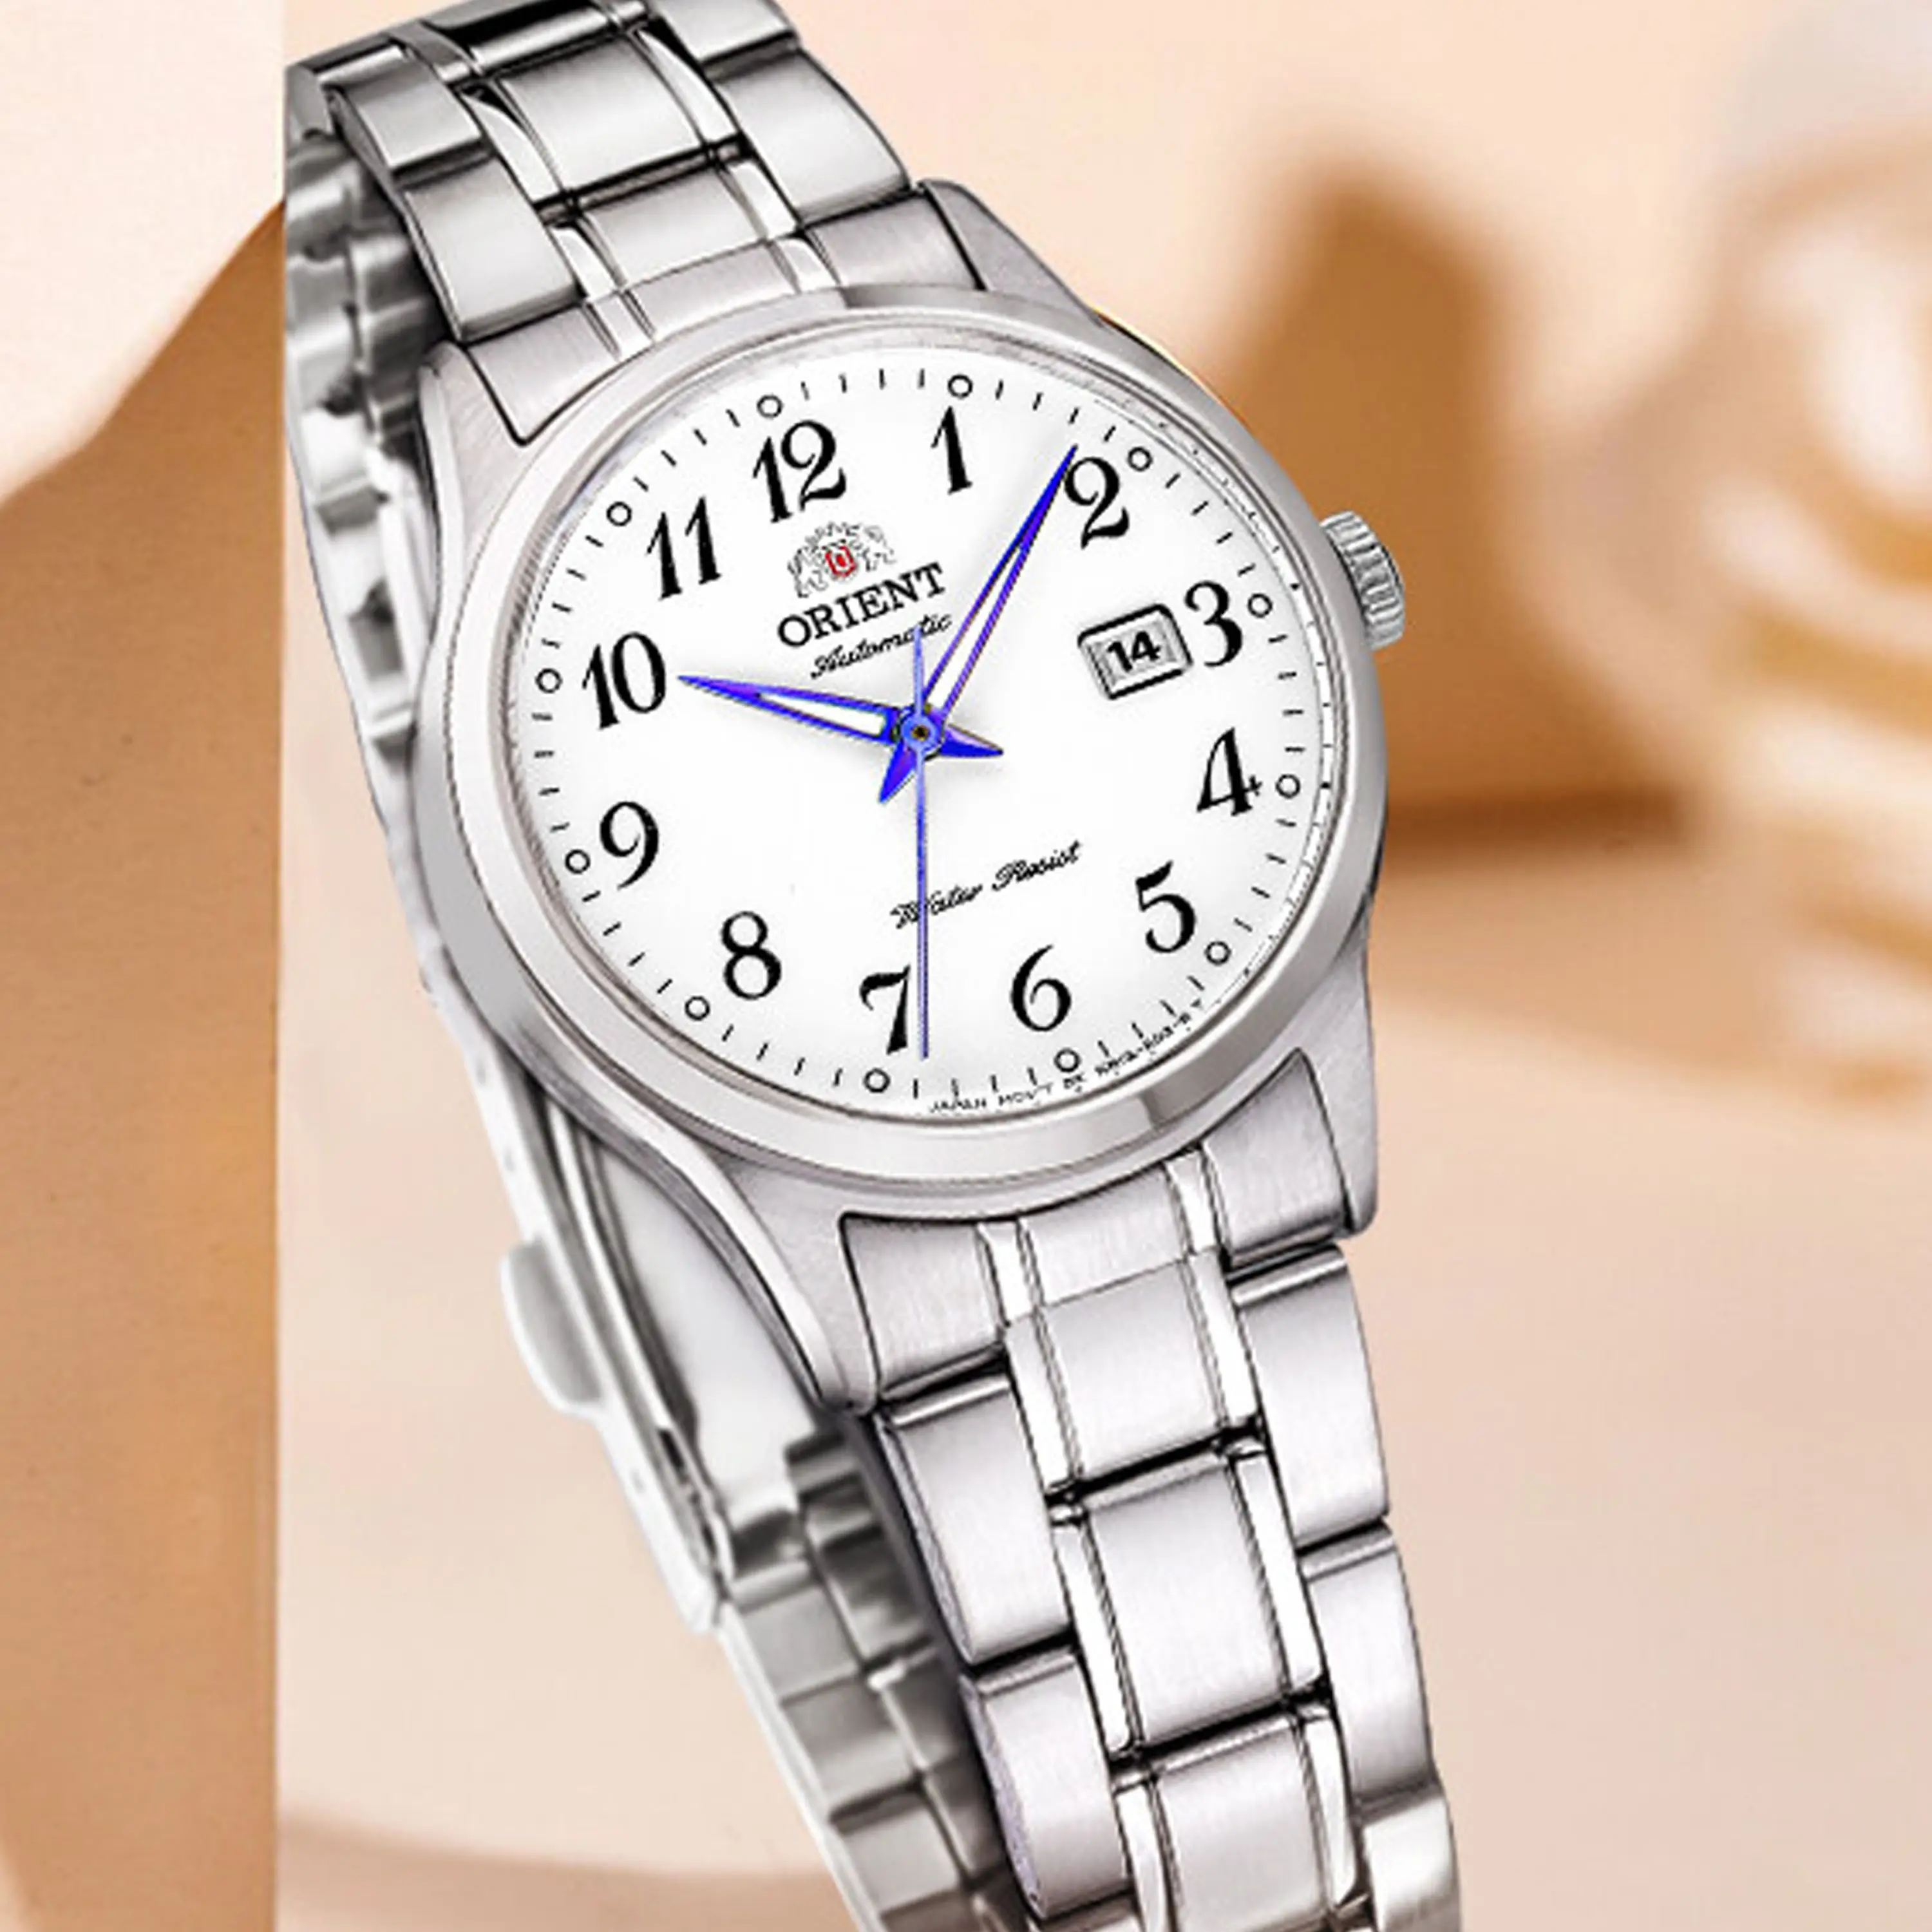 Original Orient Automatic Watch for Women, Japanese Wrist Watch Classic White Dial Blue Hands Dress Watch Stainless Steel 31mm enlarge